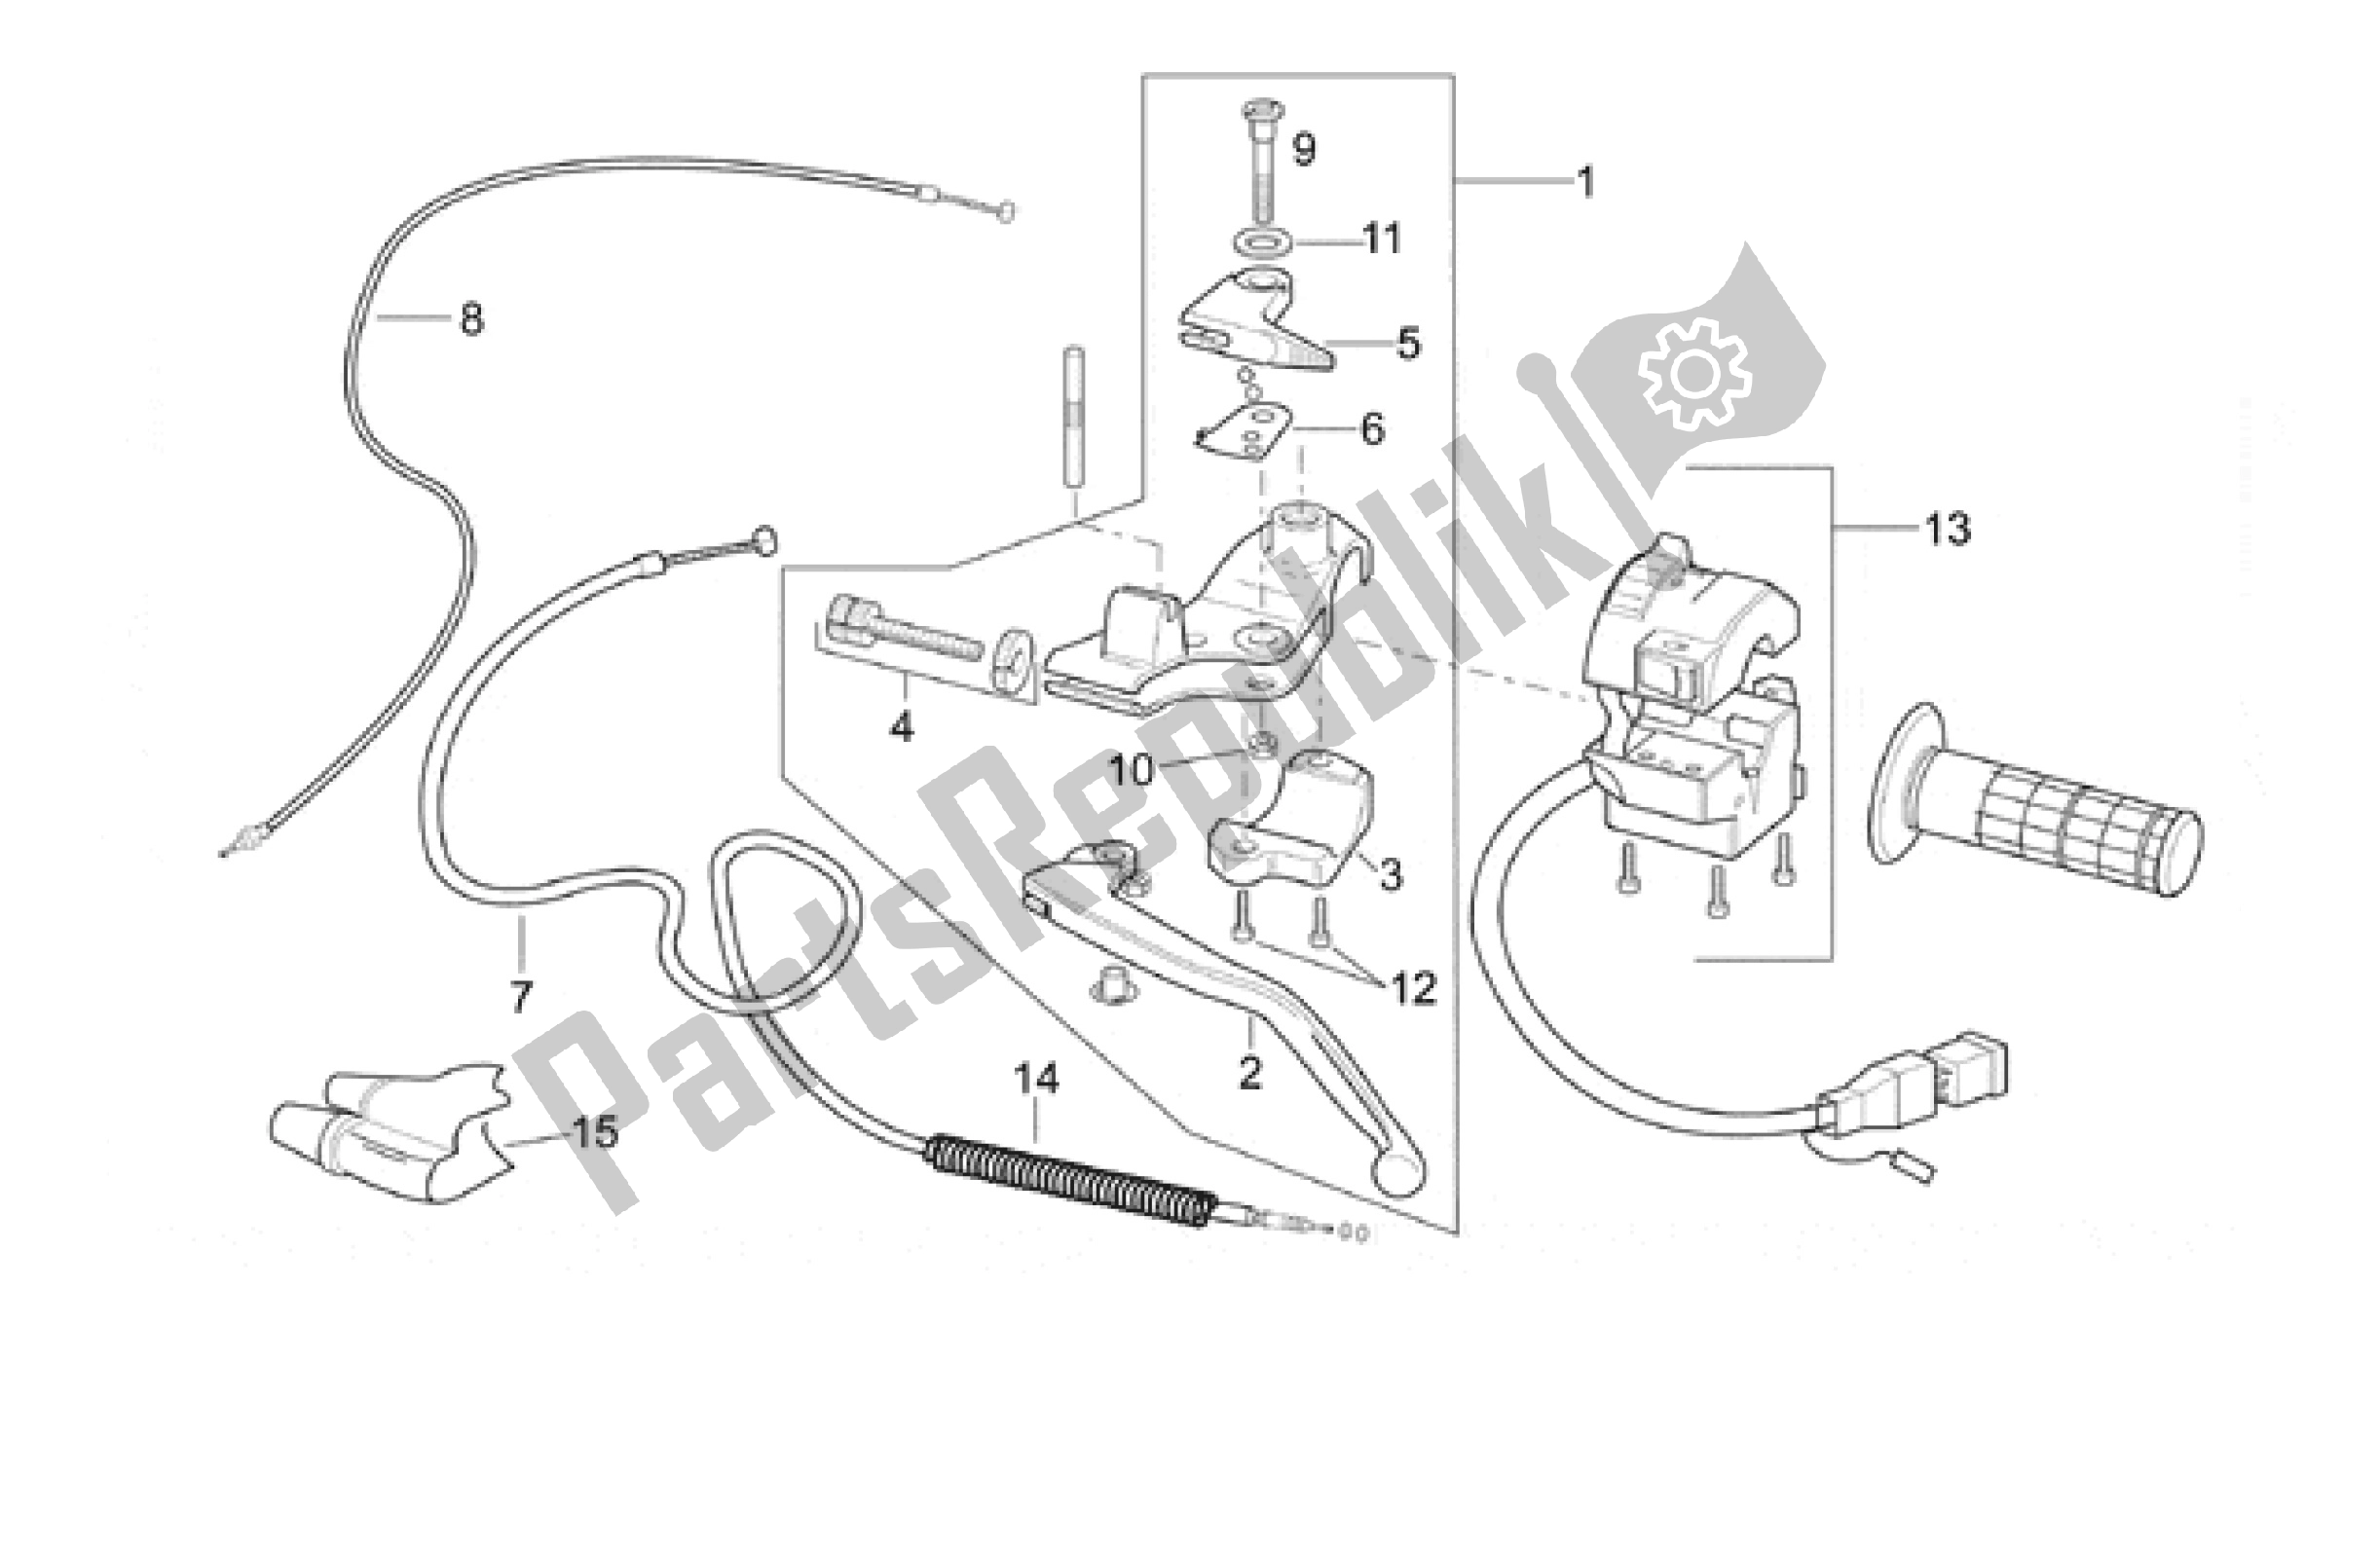 All parts for the Clutch Lever of the Aprilia ETX / RX 108 125 1999 - 2001